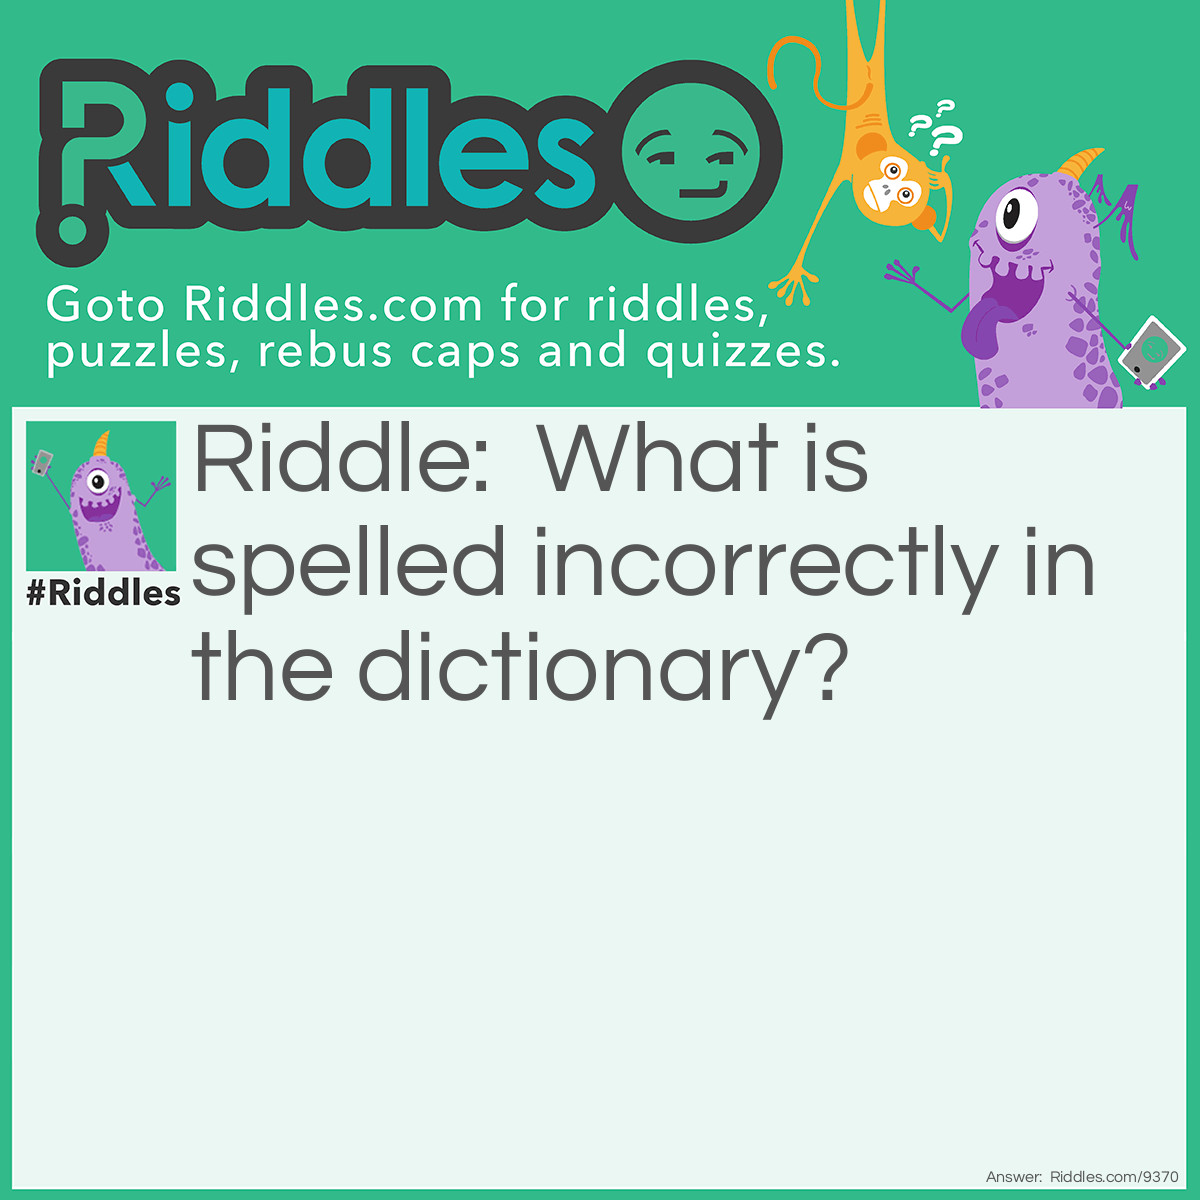 Riddle: What is spelled incorrectly in the dictionary? Answer: Incorrectly.